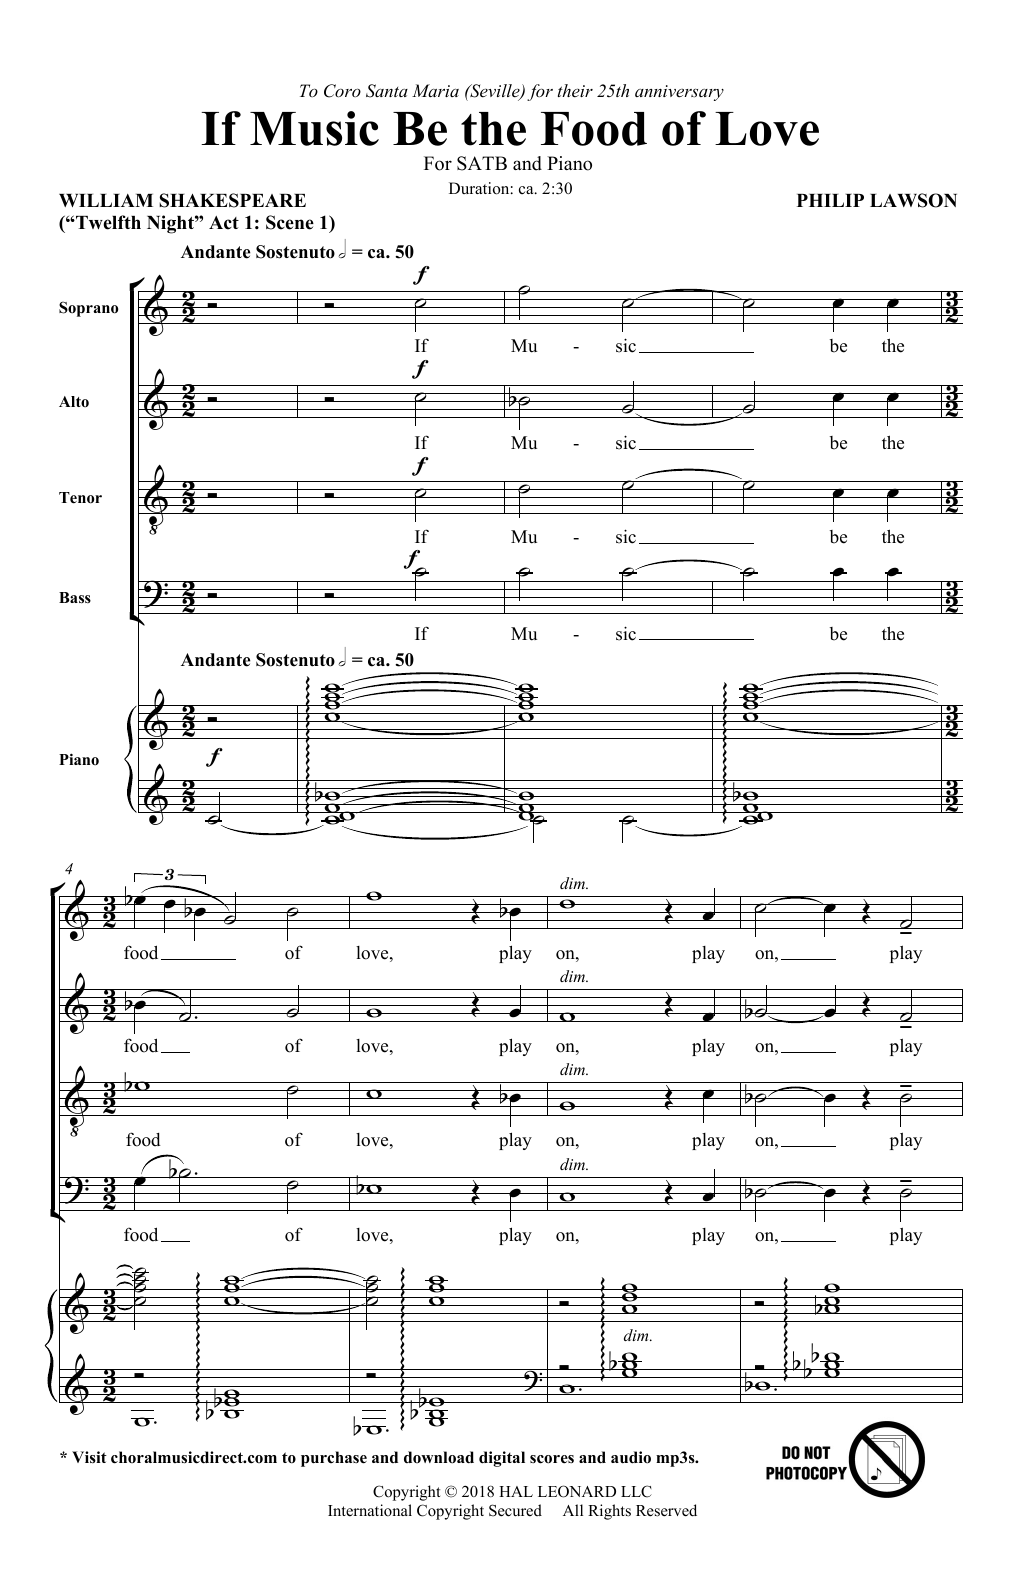 Download Philip Lawson If Music Be The Food Of Love Sheet Music